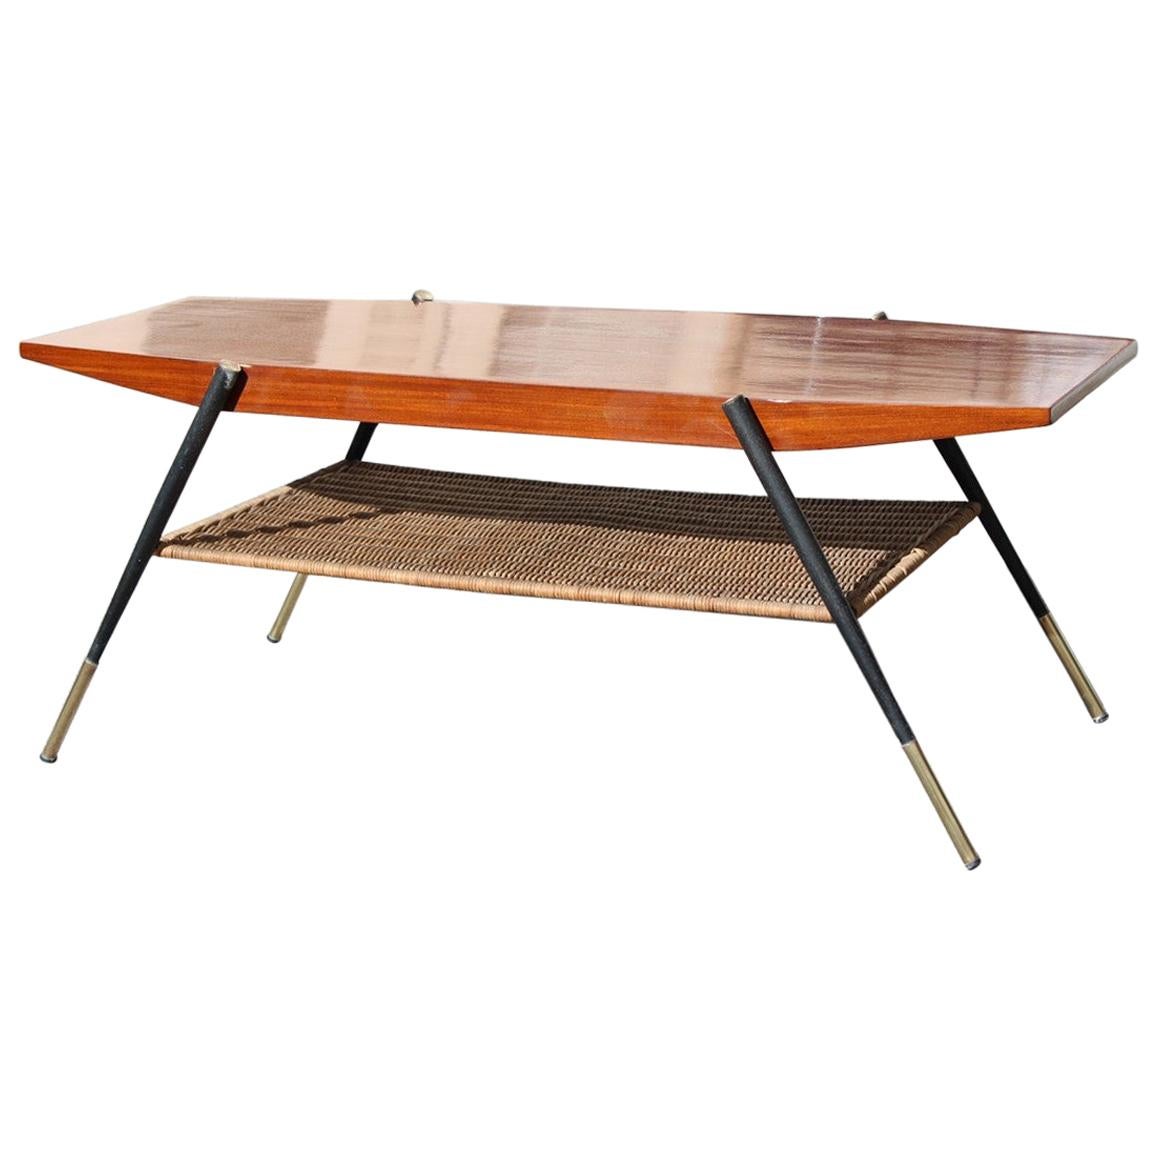 Midcentury Italian Coffee Table in Mahogany Metal Brass and Bamboo Straw, 1950s For Sale